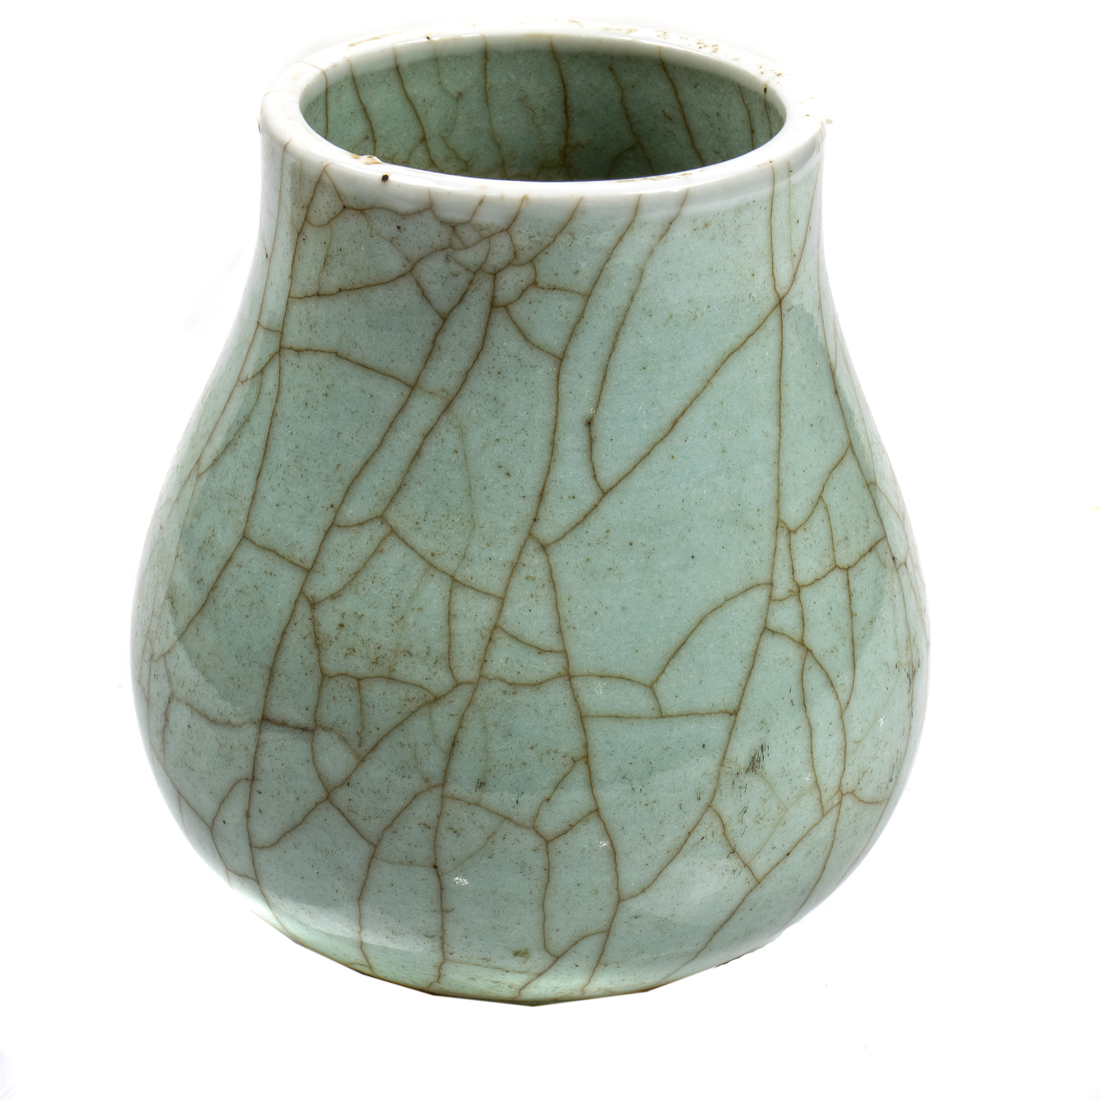 CHINESE GUAN TYPE CRACKLE GLAZED 2d187c